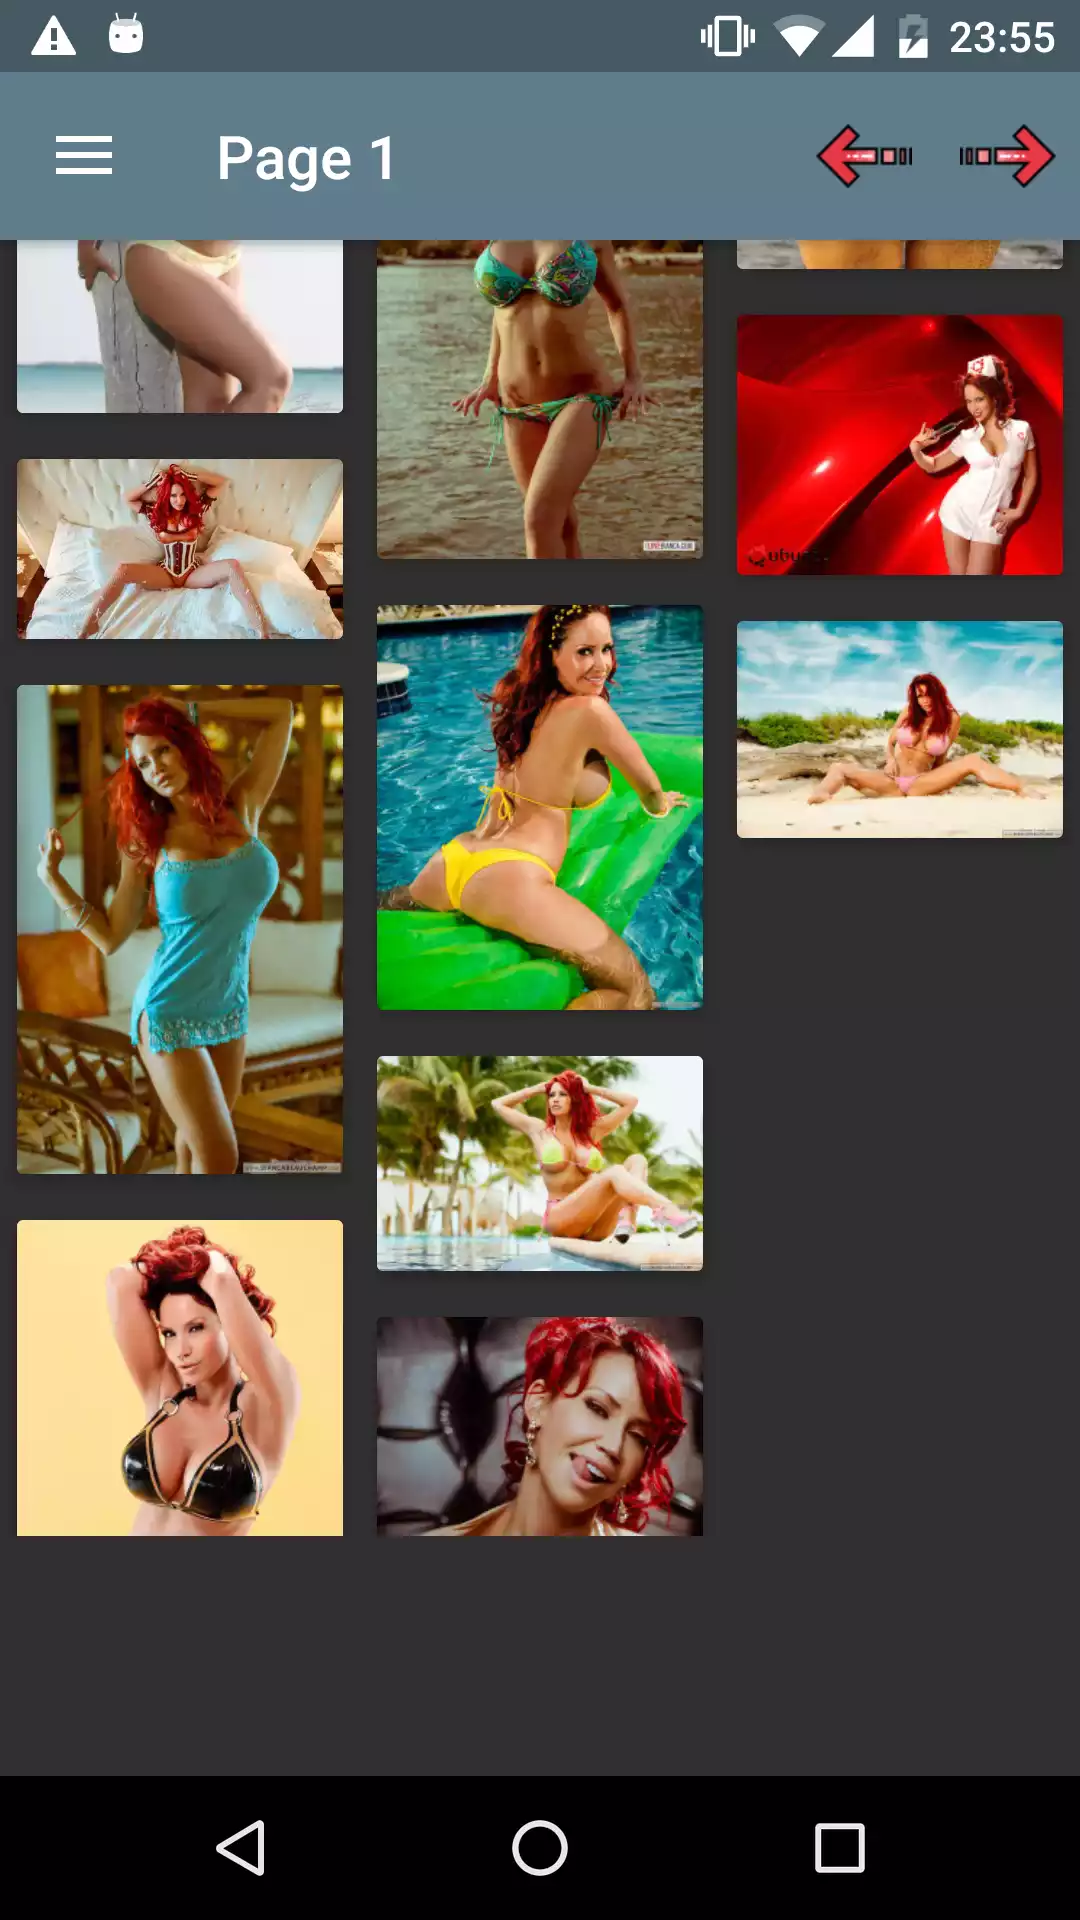 Bianca Beauchamp wallpaper,adult,updates,sexy,app,shemale,gallery,pics,apps,photo,picture,panties,hentai,apk,manga,hentia,android,backgrounds,wallpapers,erotic